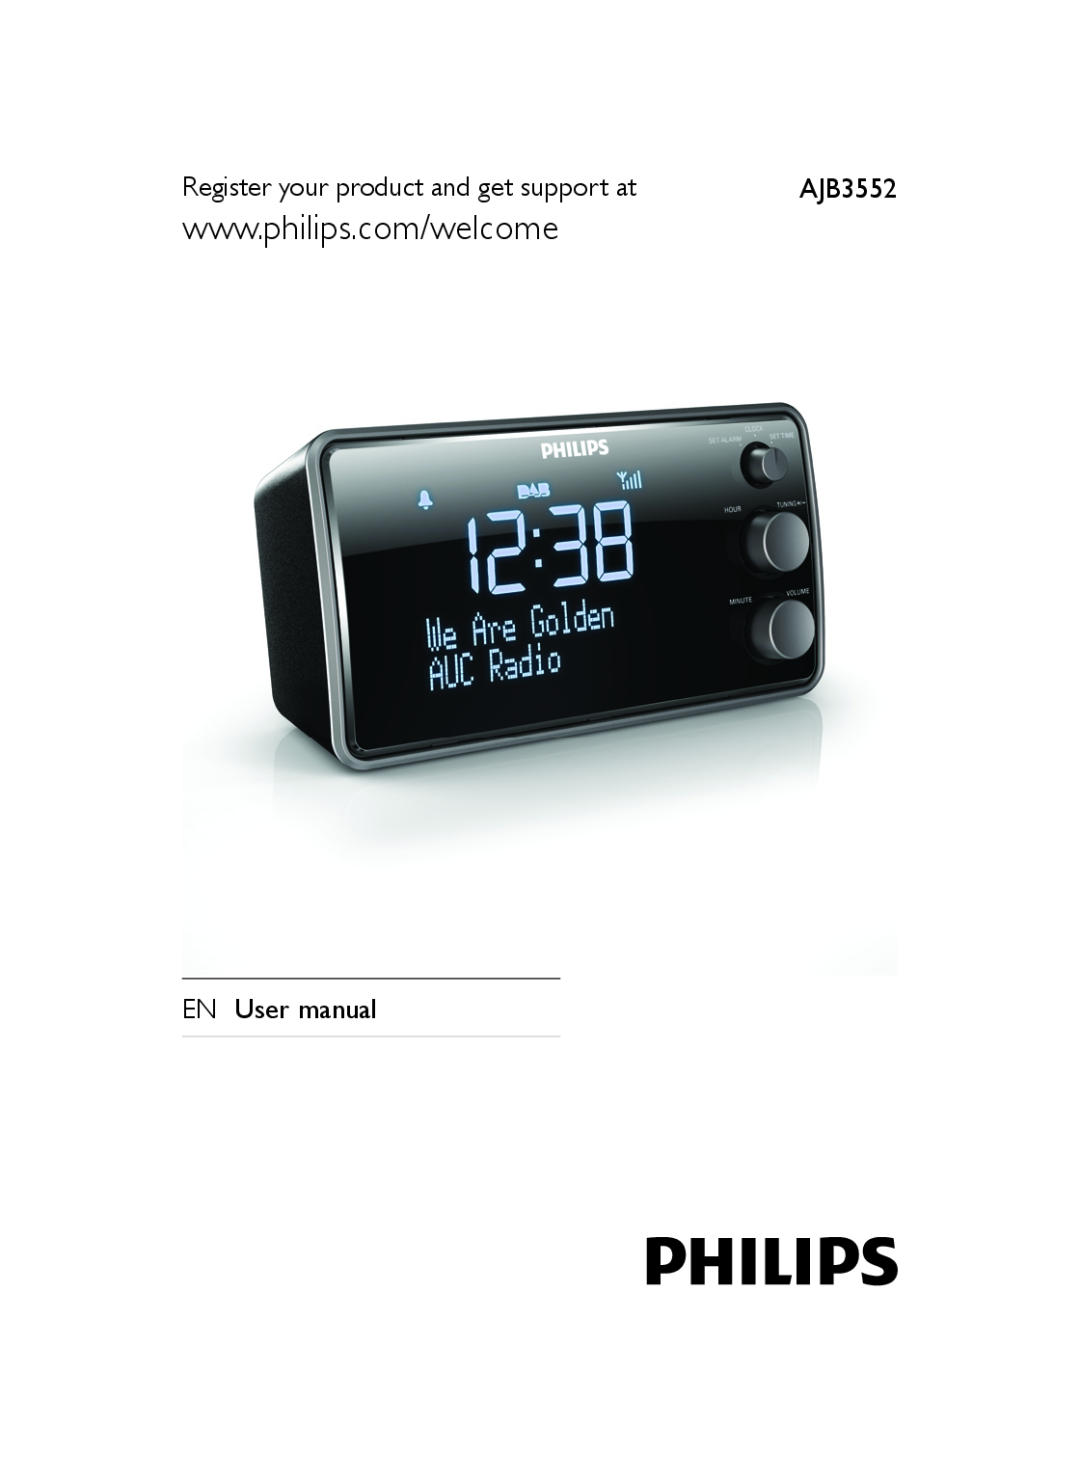 Philips AJB3552/05 user manual Register your product and get support at, EN User manual 